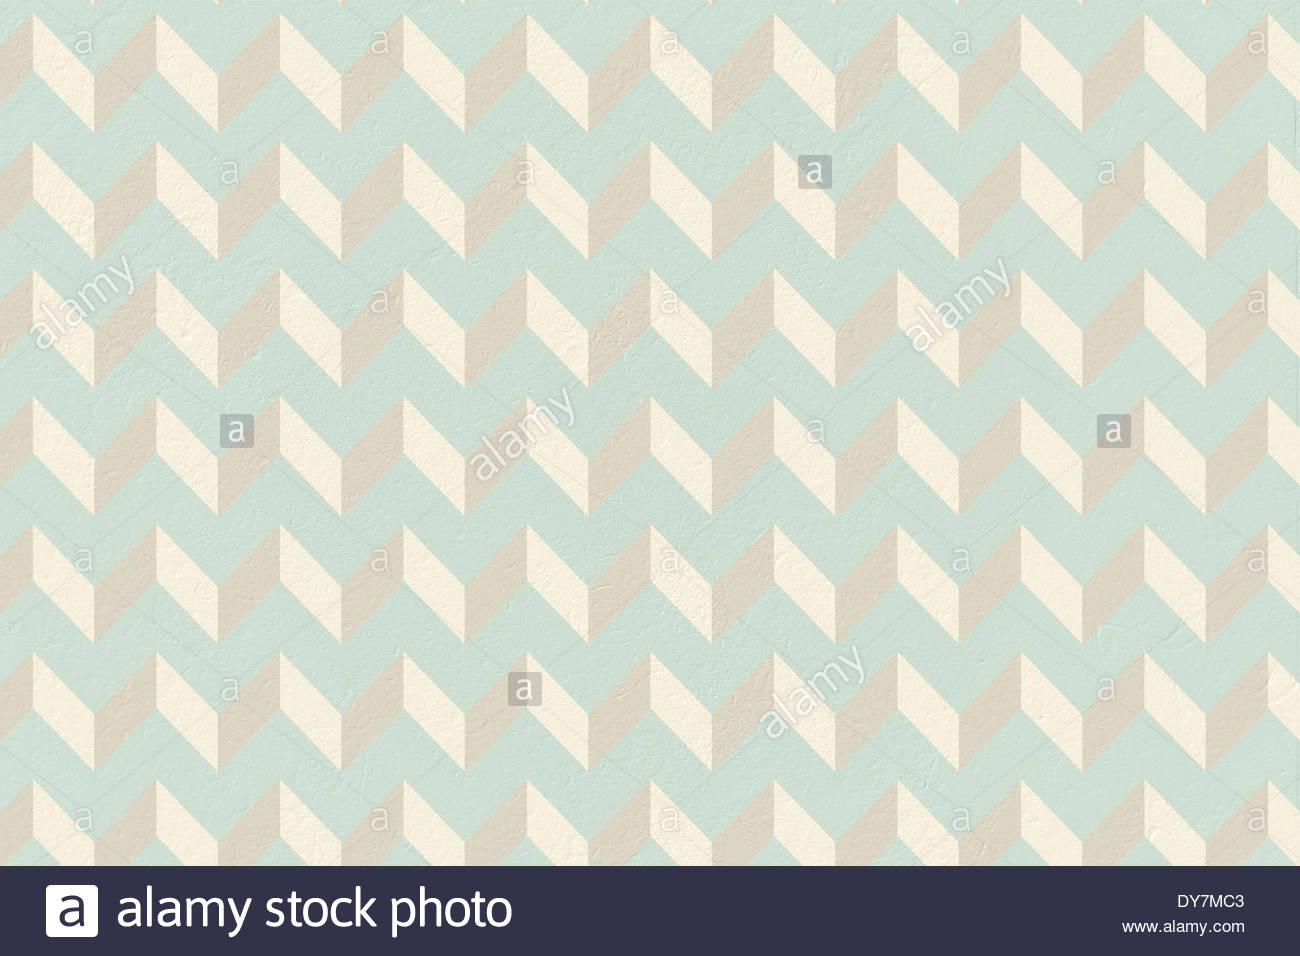 Blue And Cream Patterned Wallpaper Stock Photo